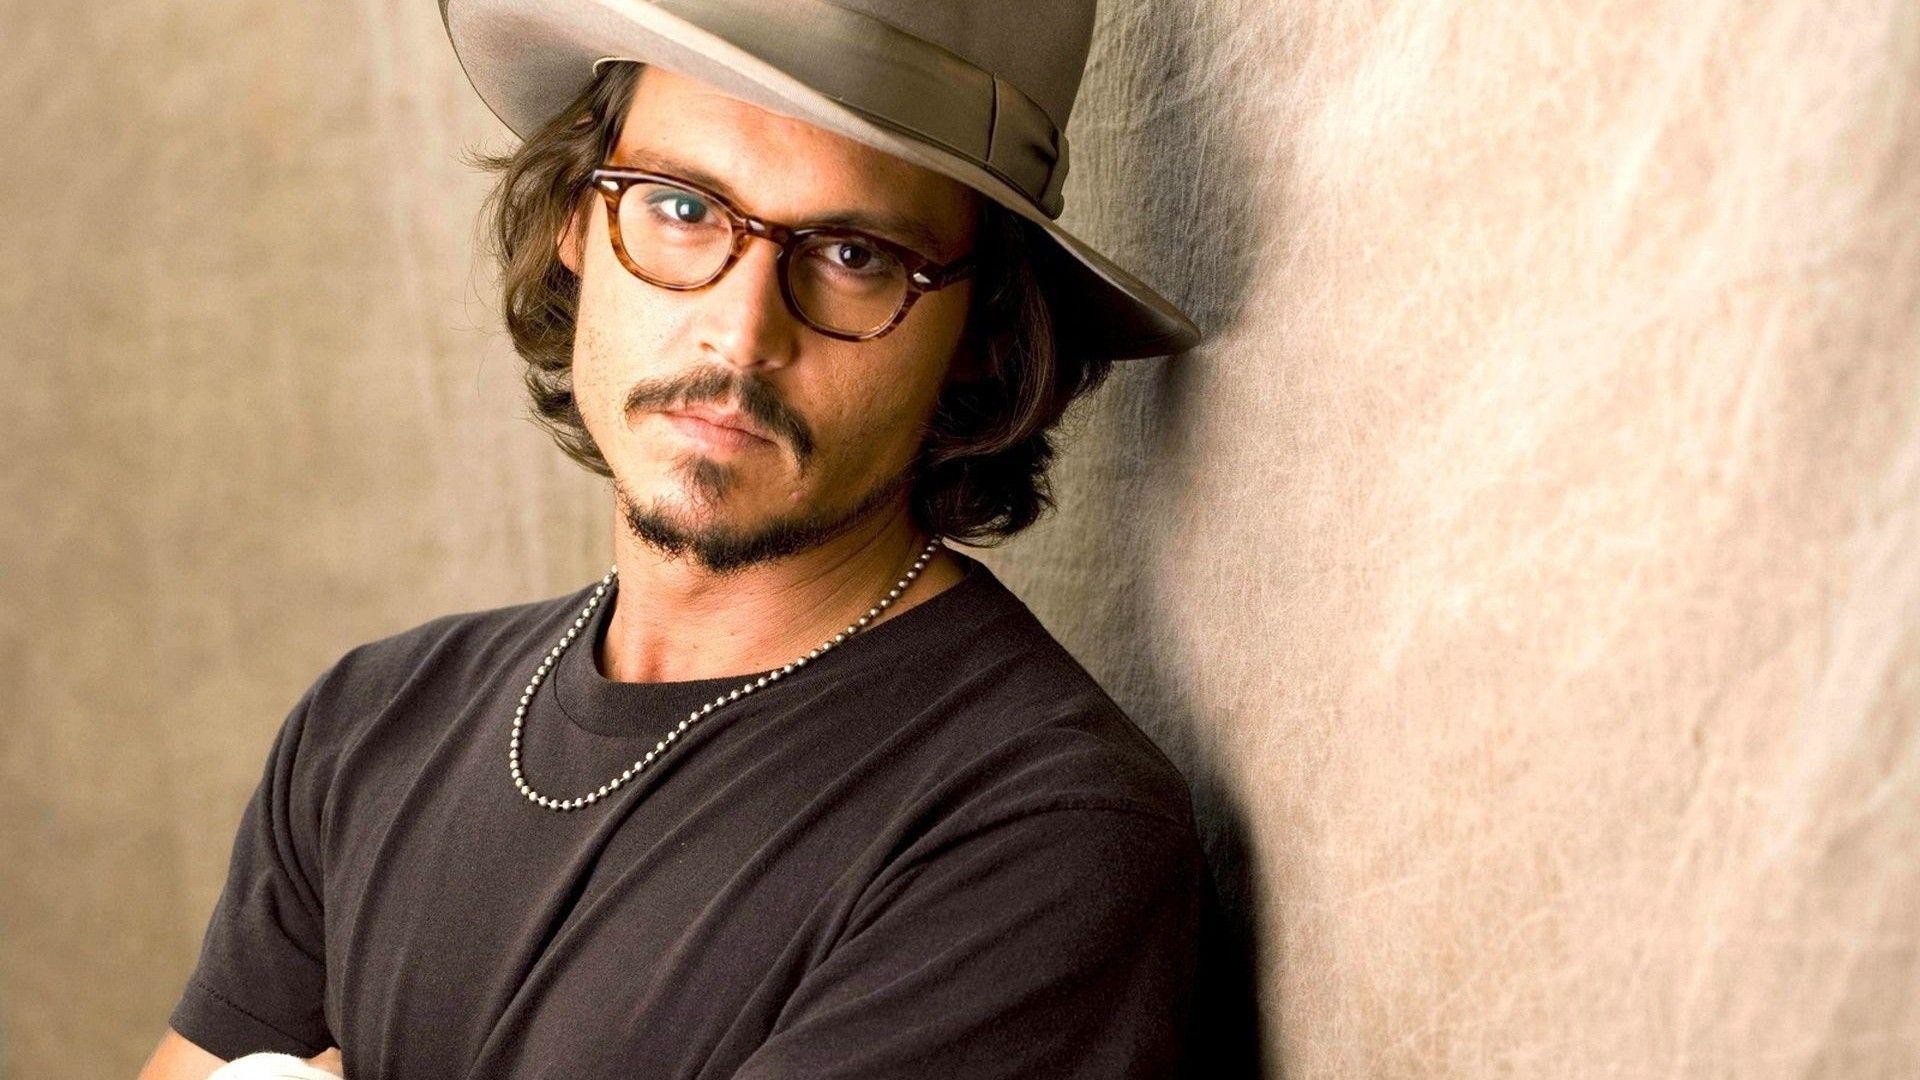 1920x1080 Johnny Depp HD Wallpapers | Johnny Depp Images Free Download .